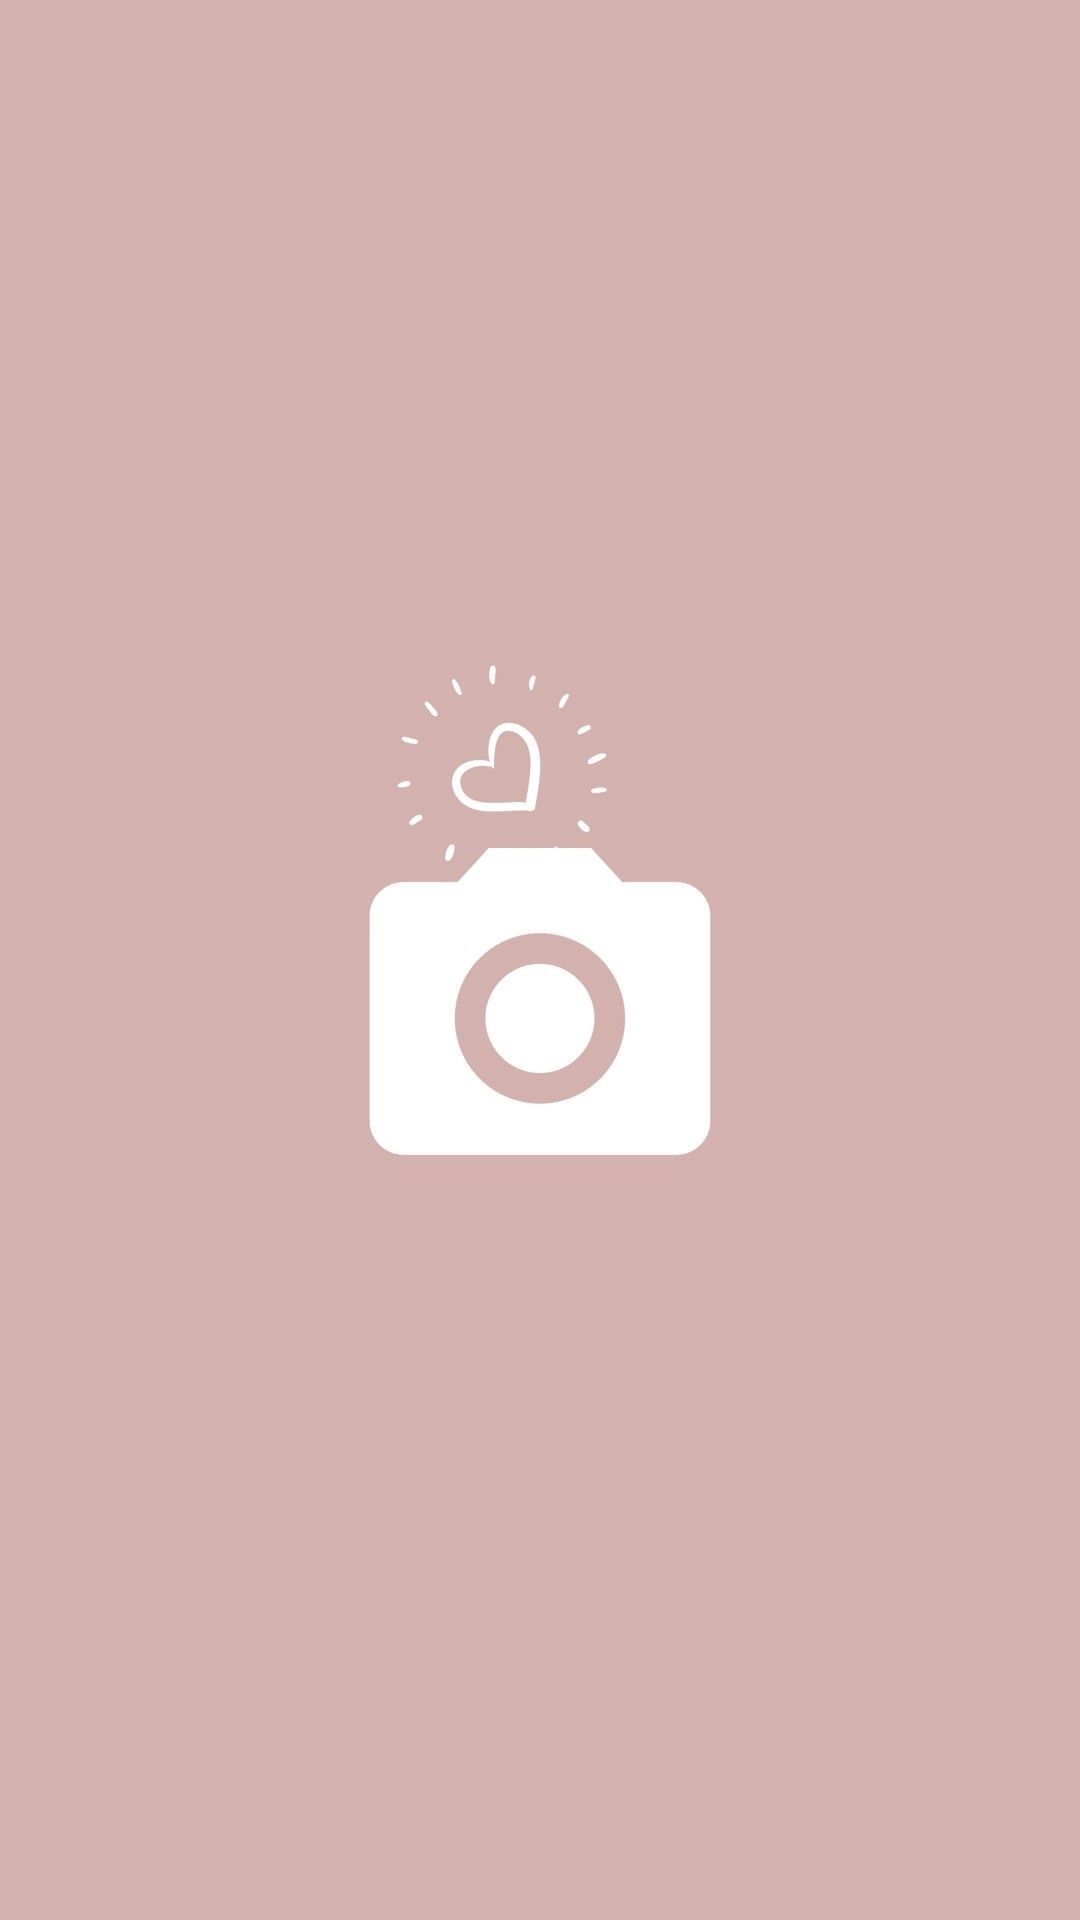 Text Bubble, Camera Icon, Instagram , Insta Icon, Instagram Highlight Icon, Story Highlights, Inst. Instagram logo, Instagram icons, Instagram wallpaper